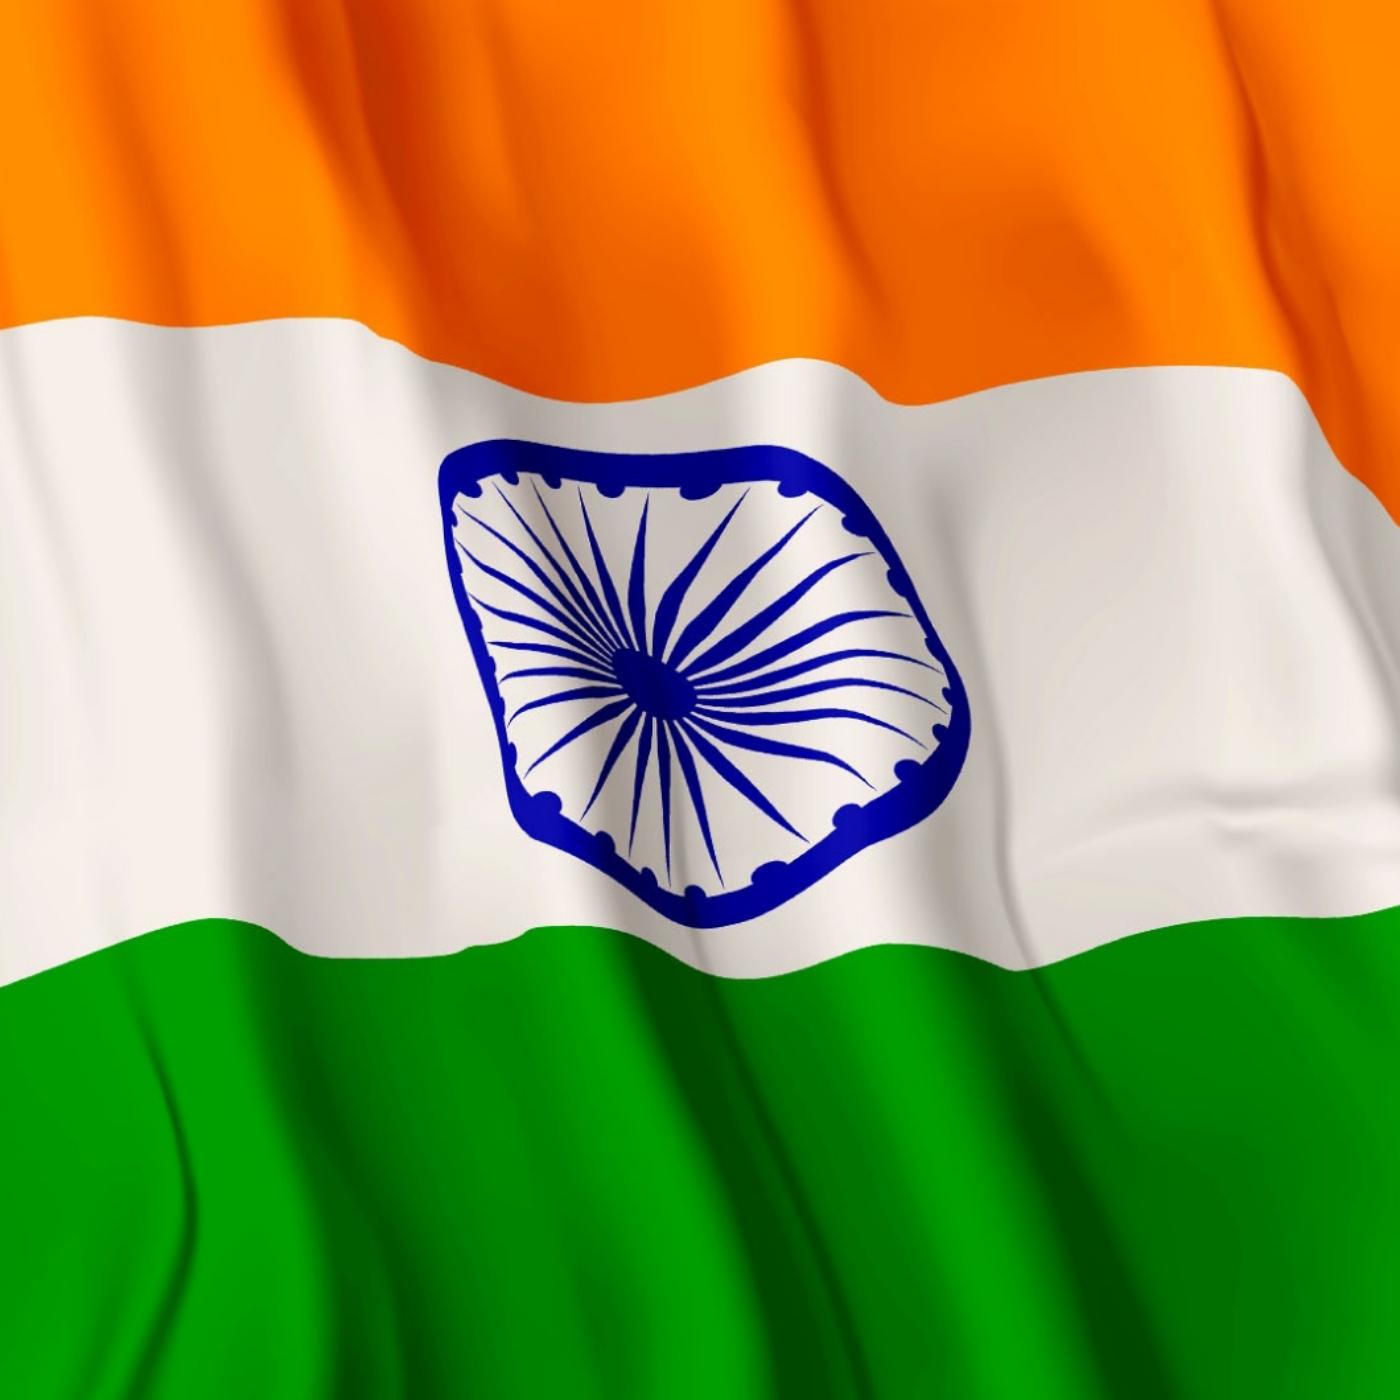 Download free HD wallpaper from above link Geography IndiaWallpaper  IndiaWallpaperHd IndiaWallpaperDo  Indian flag wallpaper Indian flag  images Indian flag